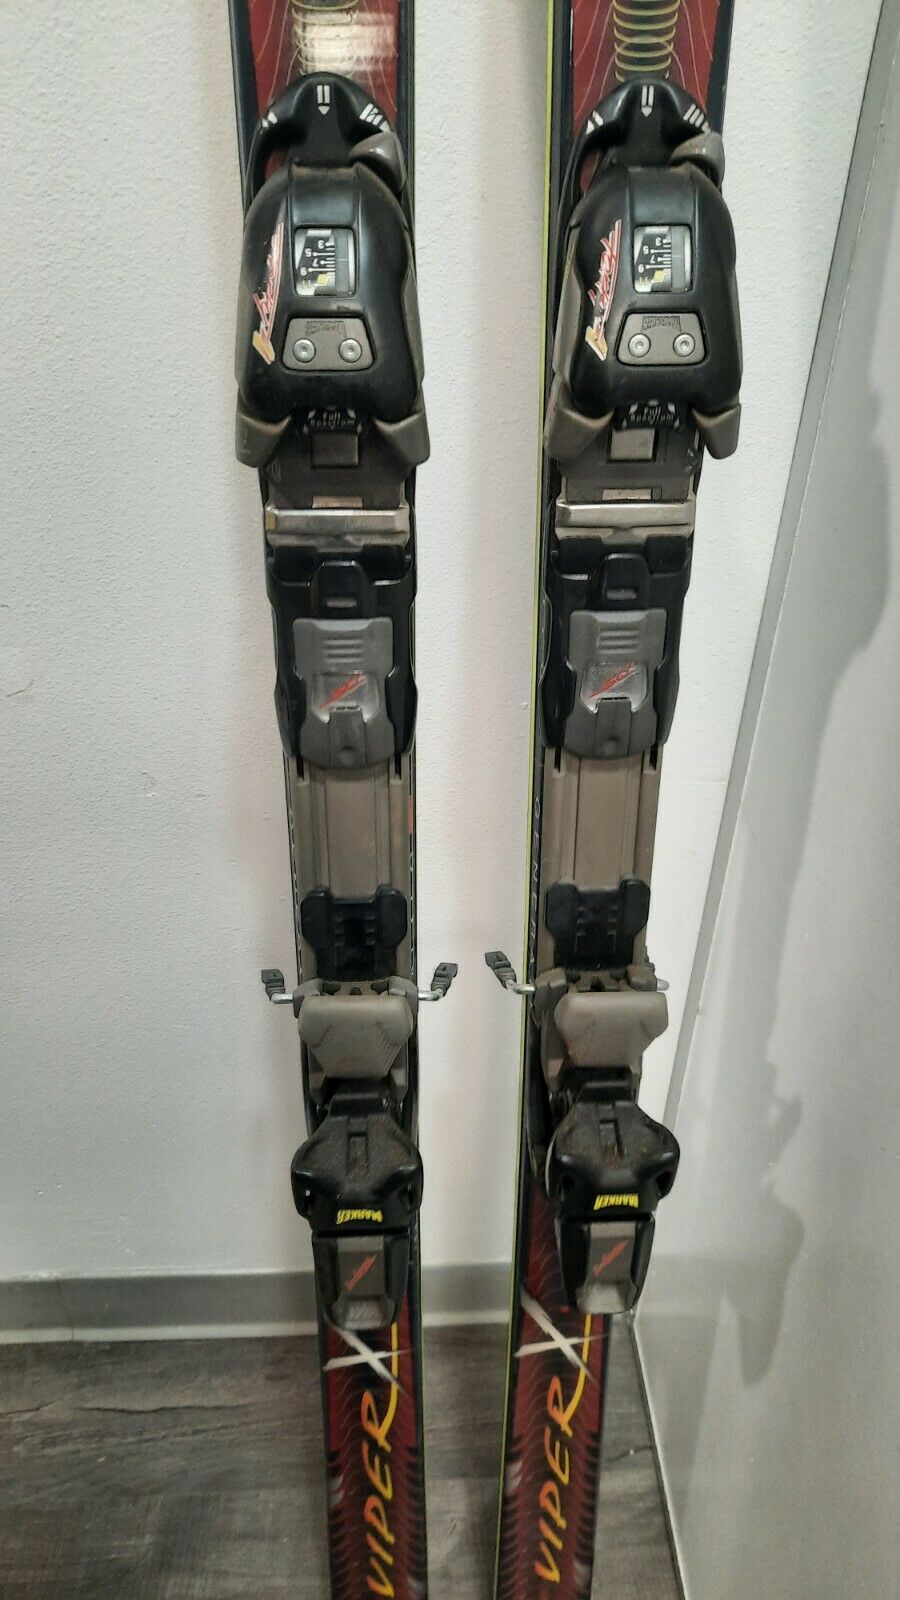 Rossignol Downhill Skis With Marker Bindings Size 204 cm